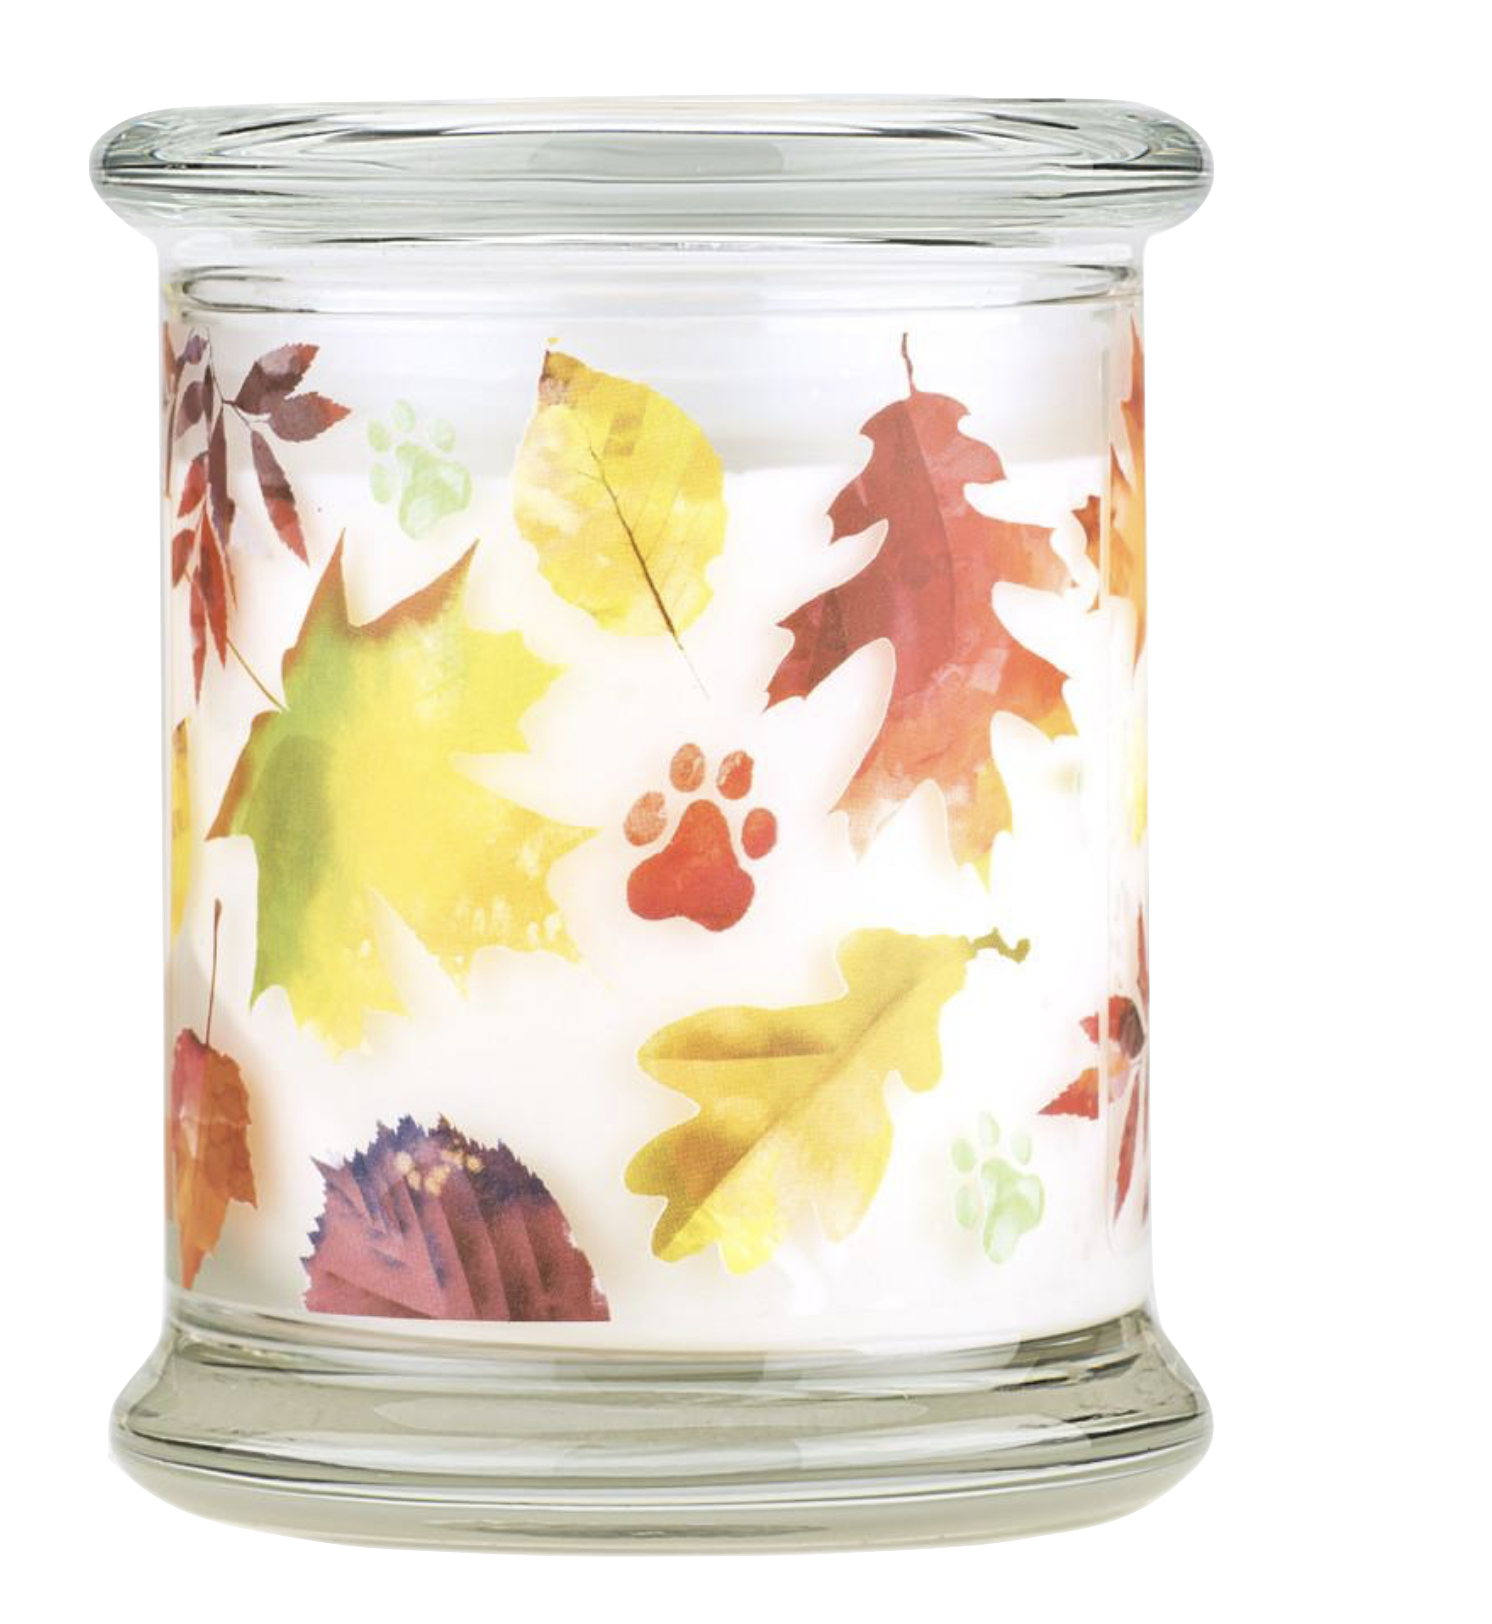 Pet House candles are hand-poured, and made from 100% natural, dye-free soy wax. Comes in an 8.5 oz. glass jar. Fragrance profile is a sweet and spicy blend of nutmeg, cinnamon, cloves, and drying leaves in the forest.